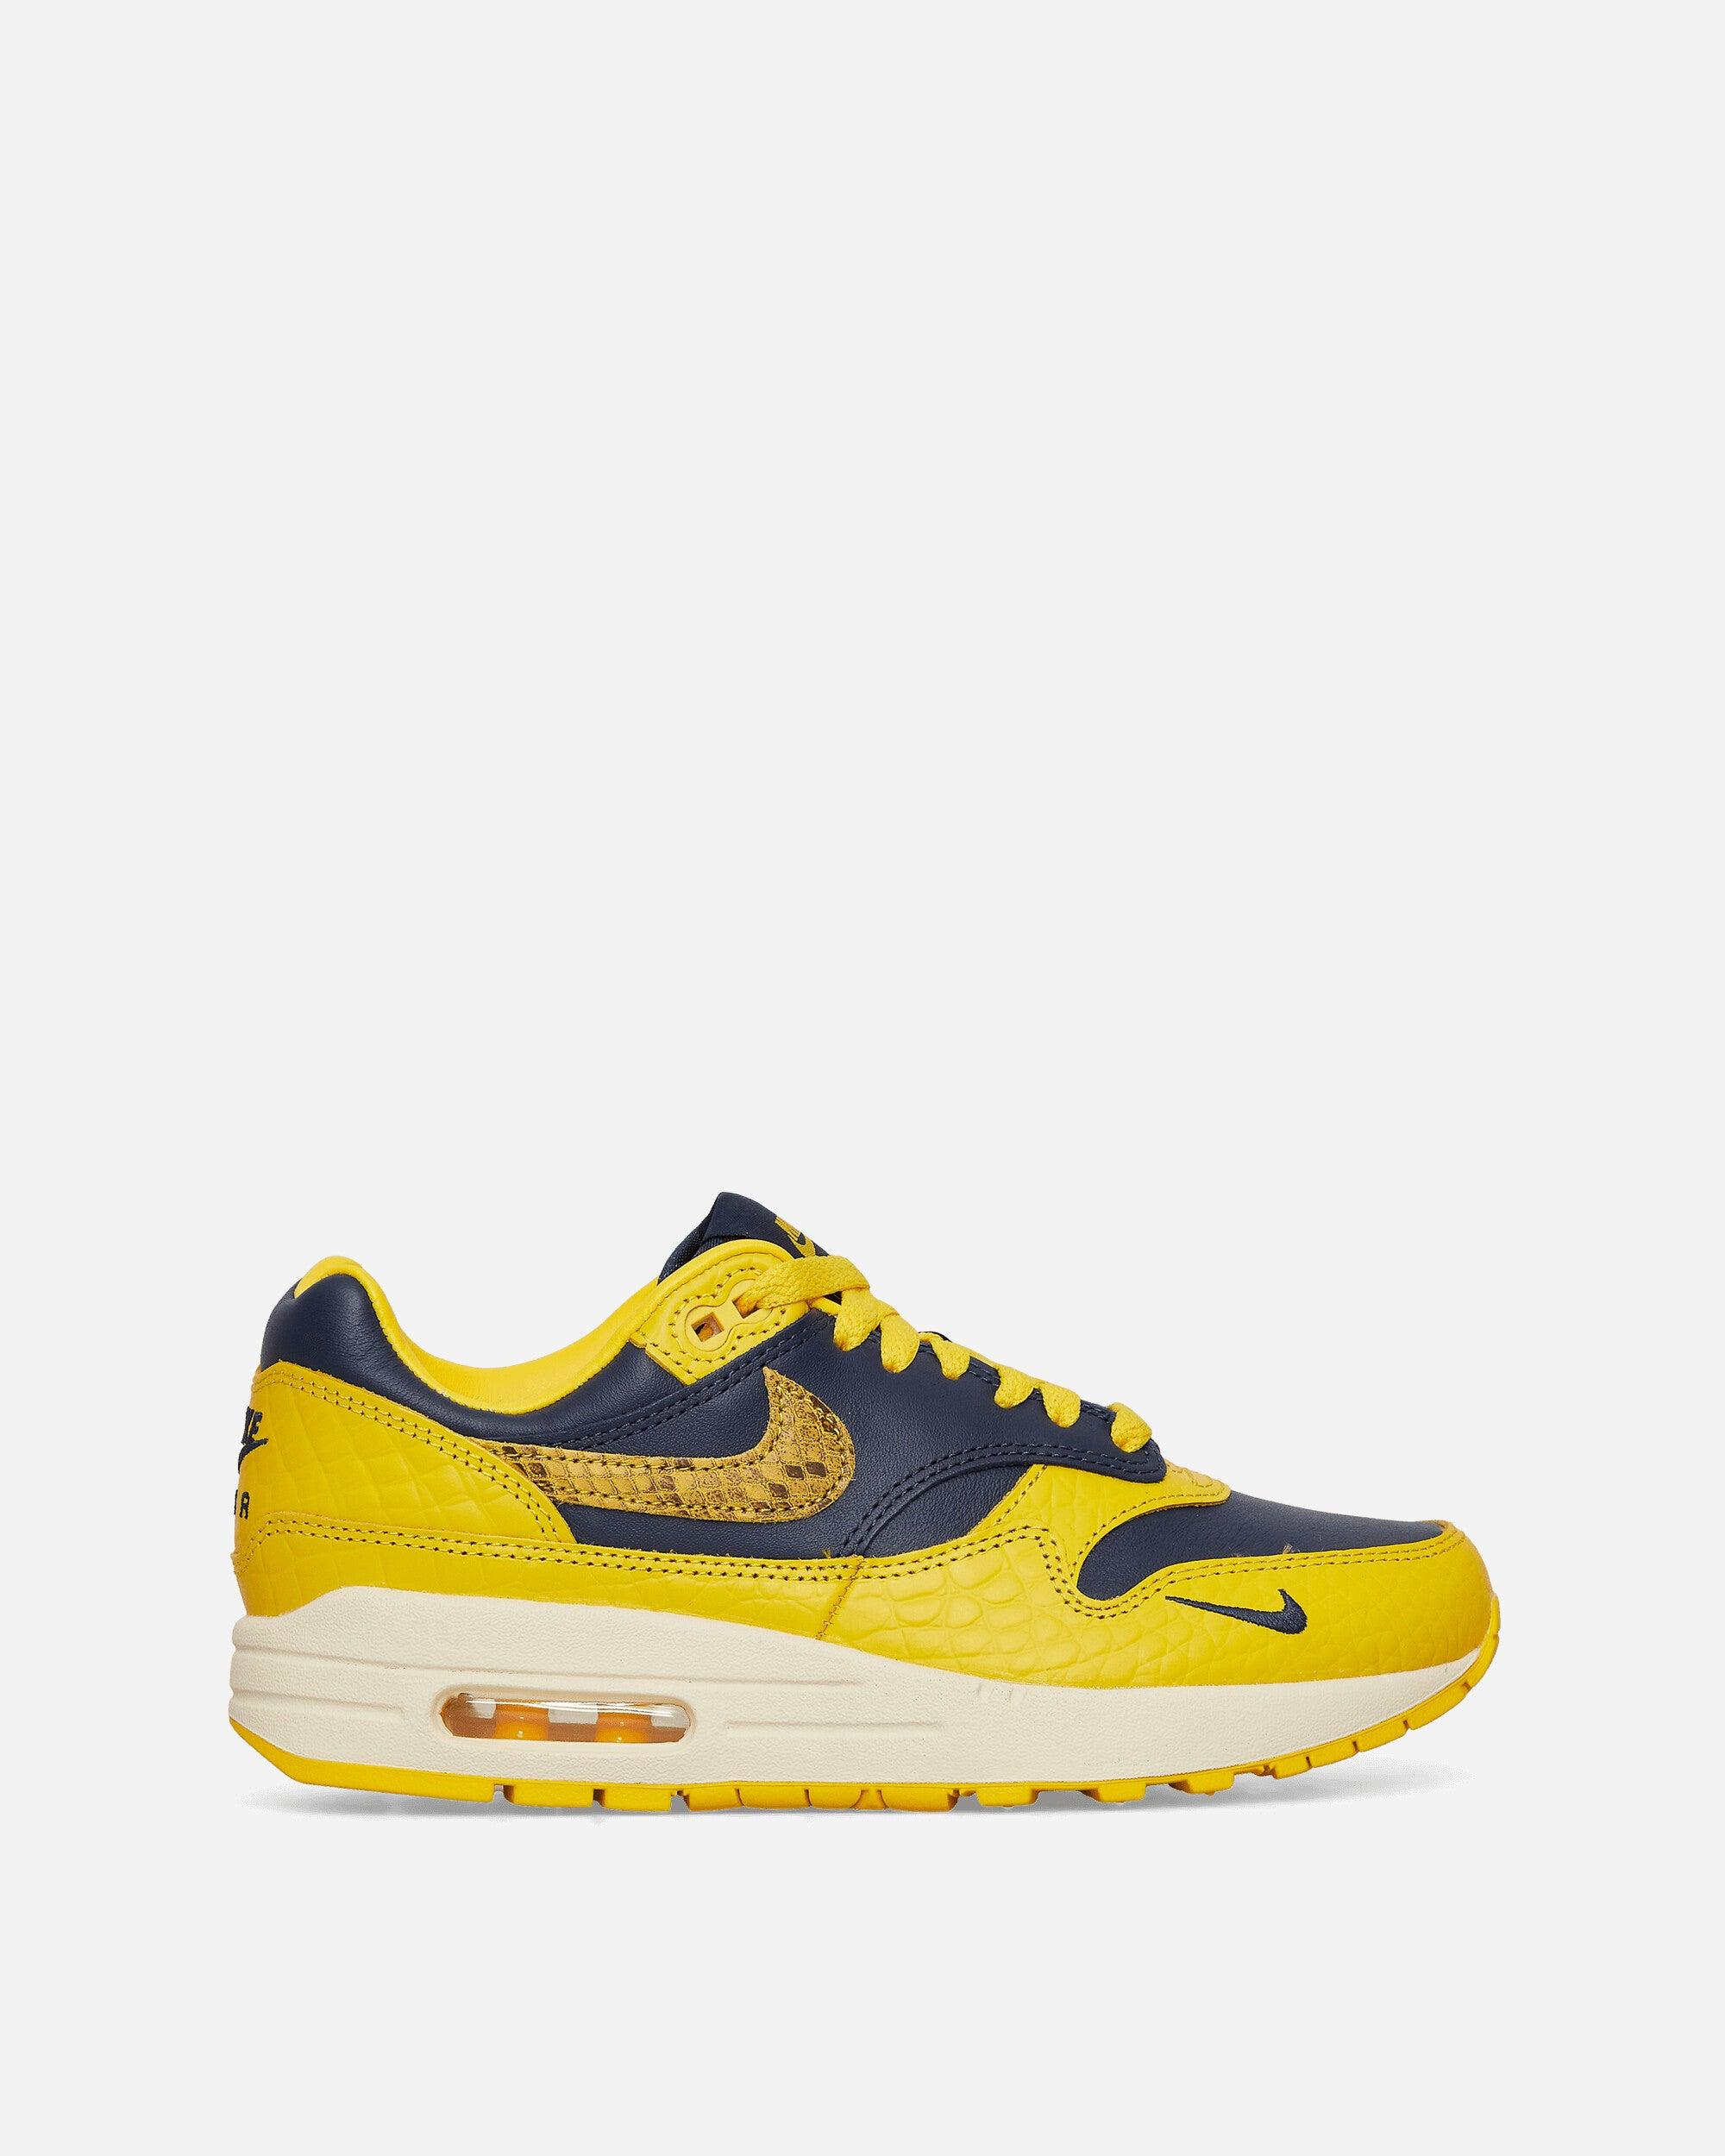 Wmns Air Max 1 Co.jp Head To Head Sneakers Midnight Navy / Varsity Maize